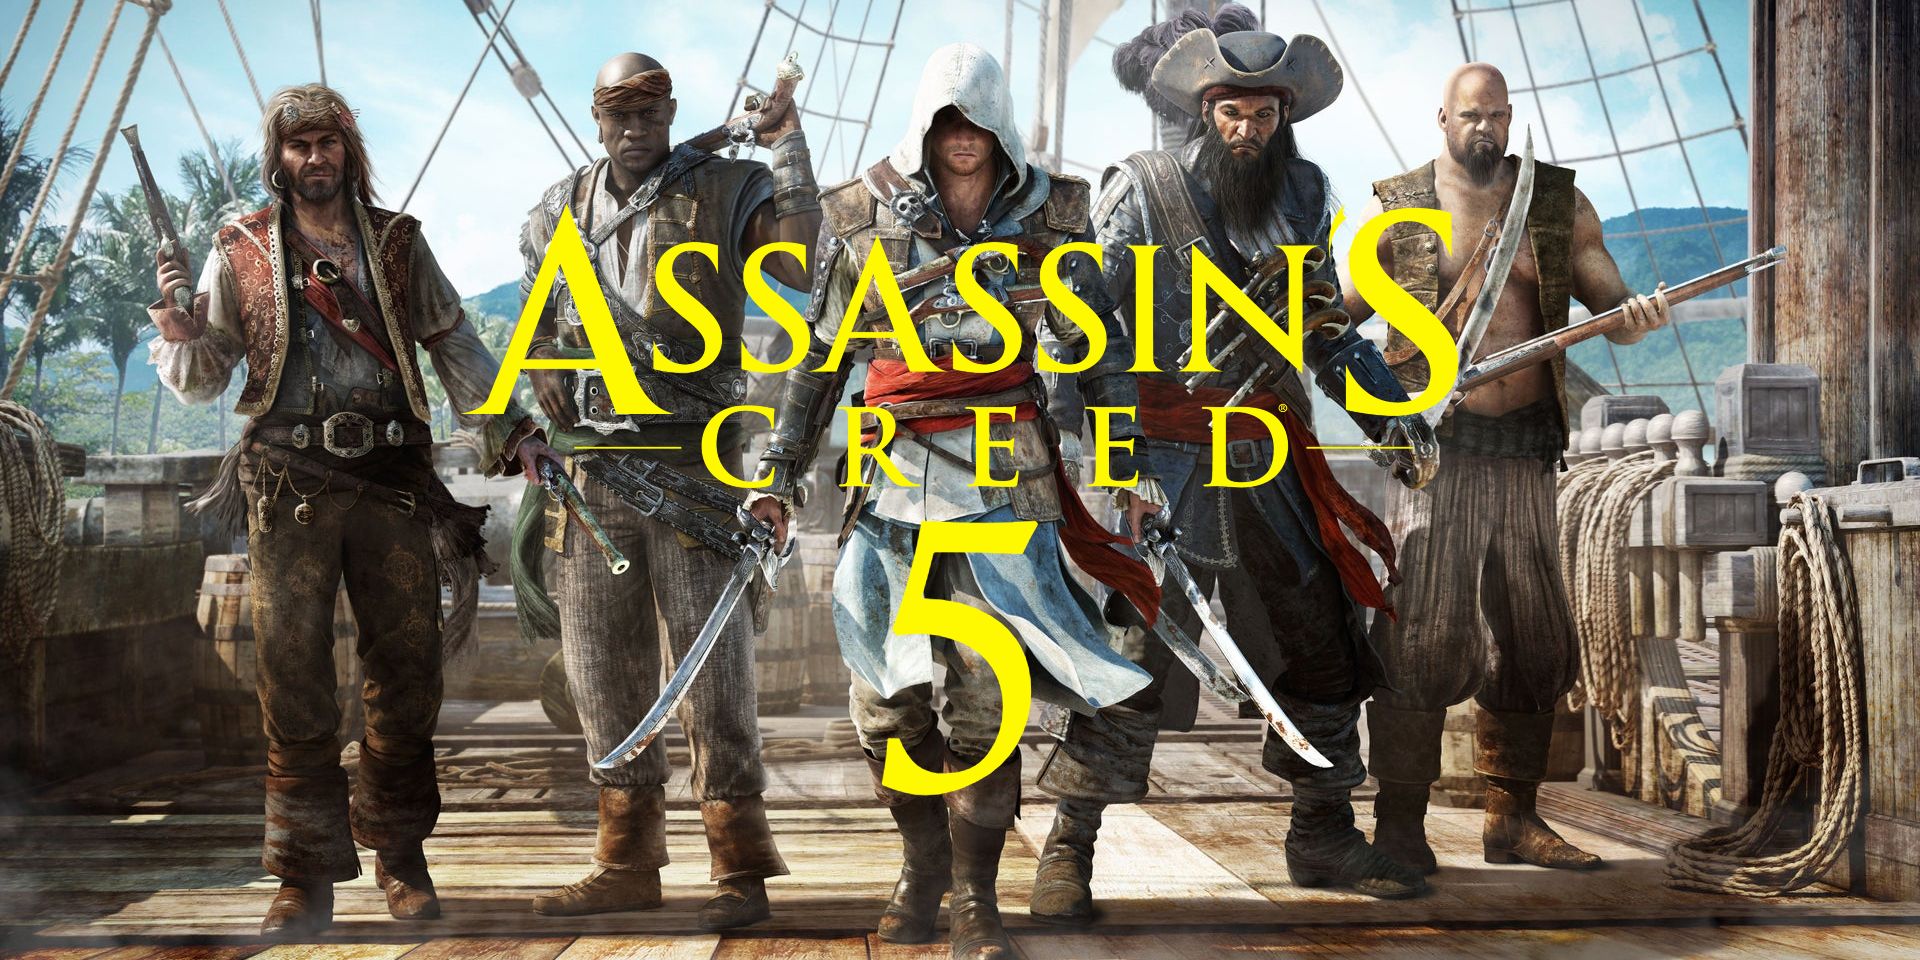 creed 5 download